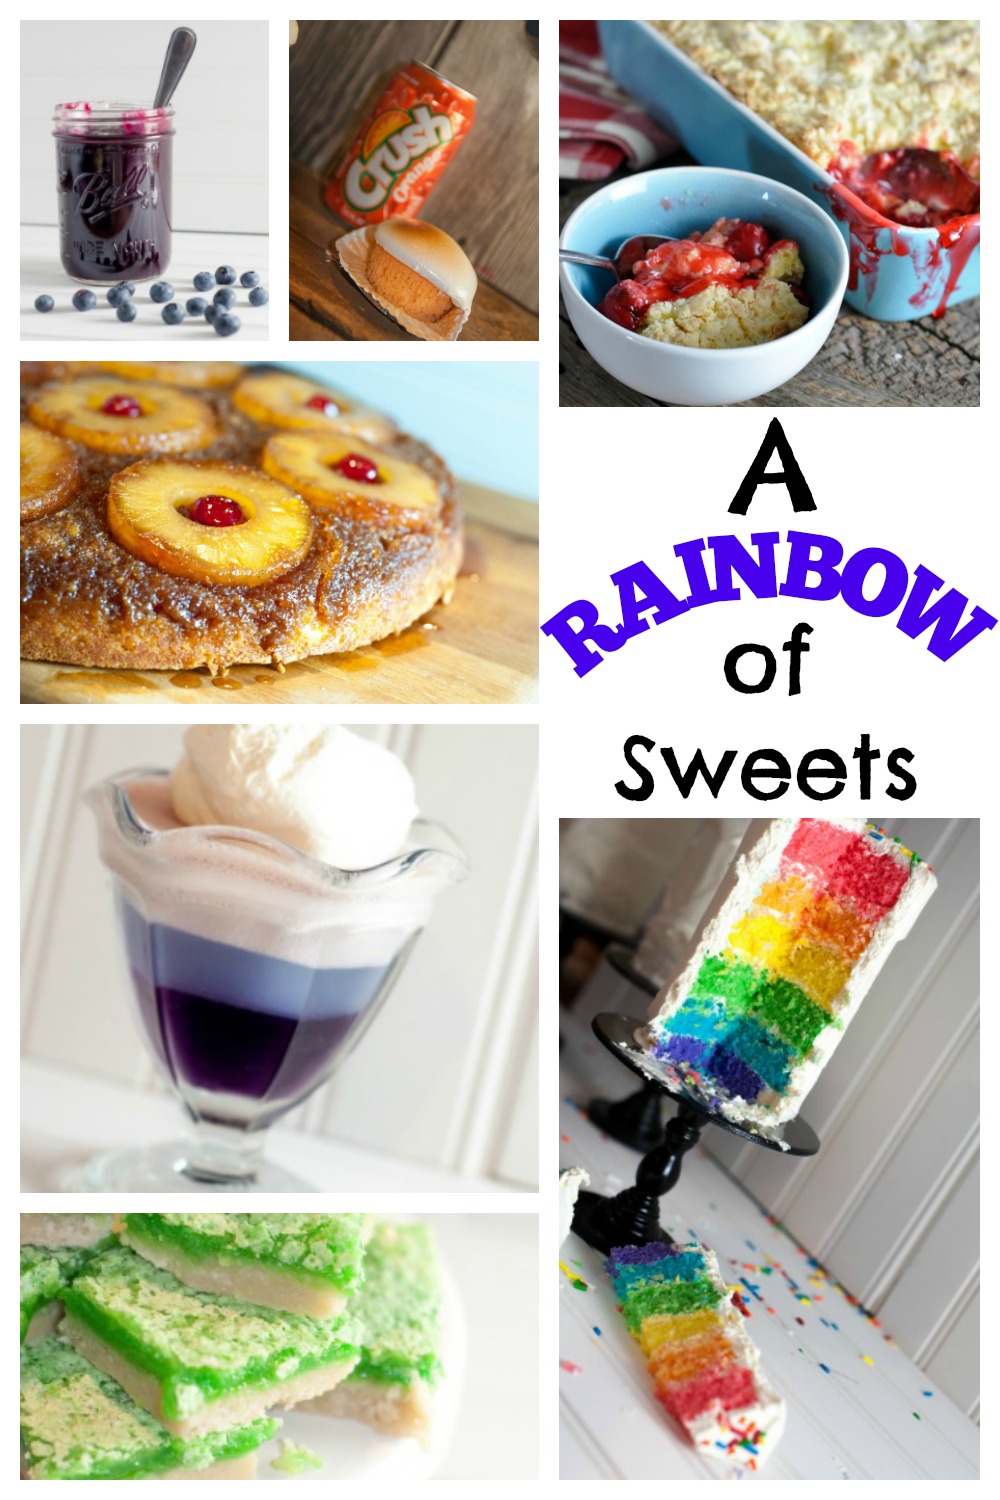 A Rainbow of Sweets from Farmwife Feeds to celebrate the colors for Birthday's, St Patricks Day or Sunday school. #rainbow #colors #recipes #sweets #dessert